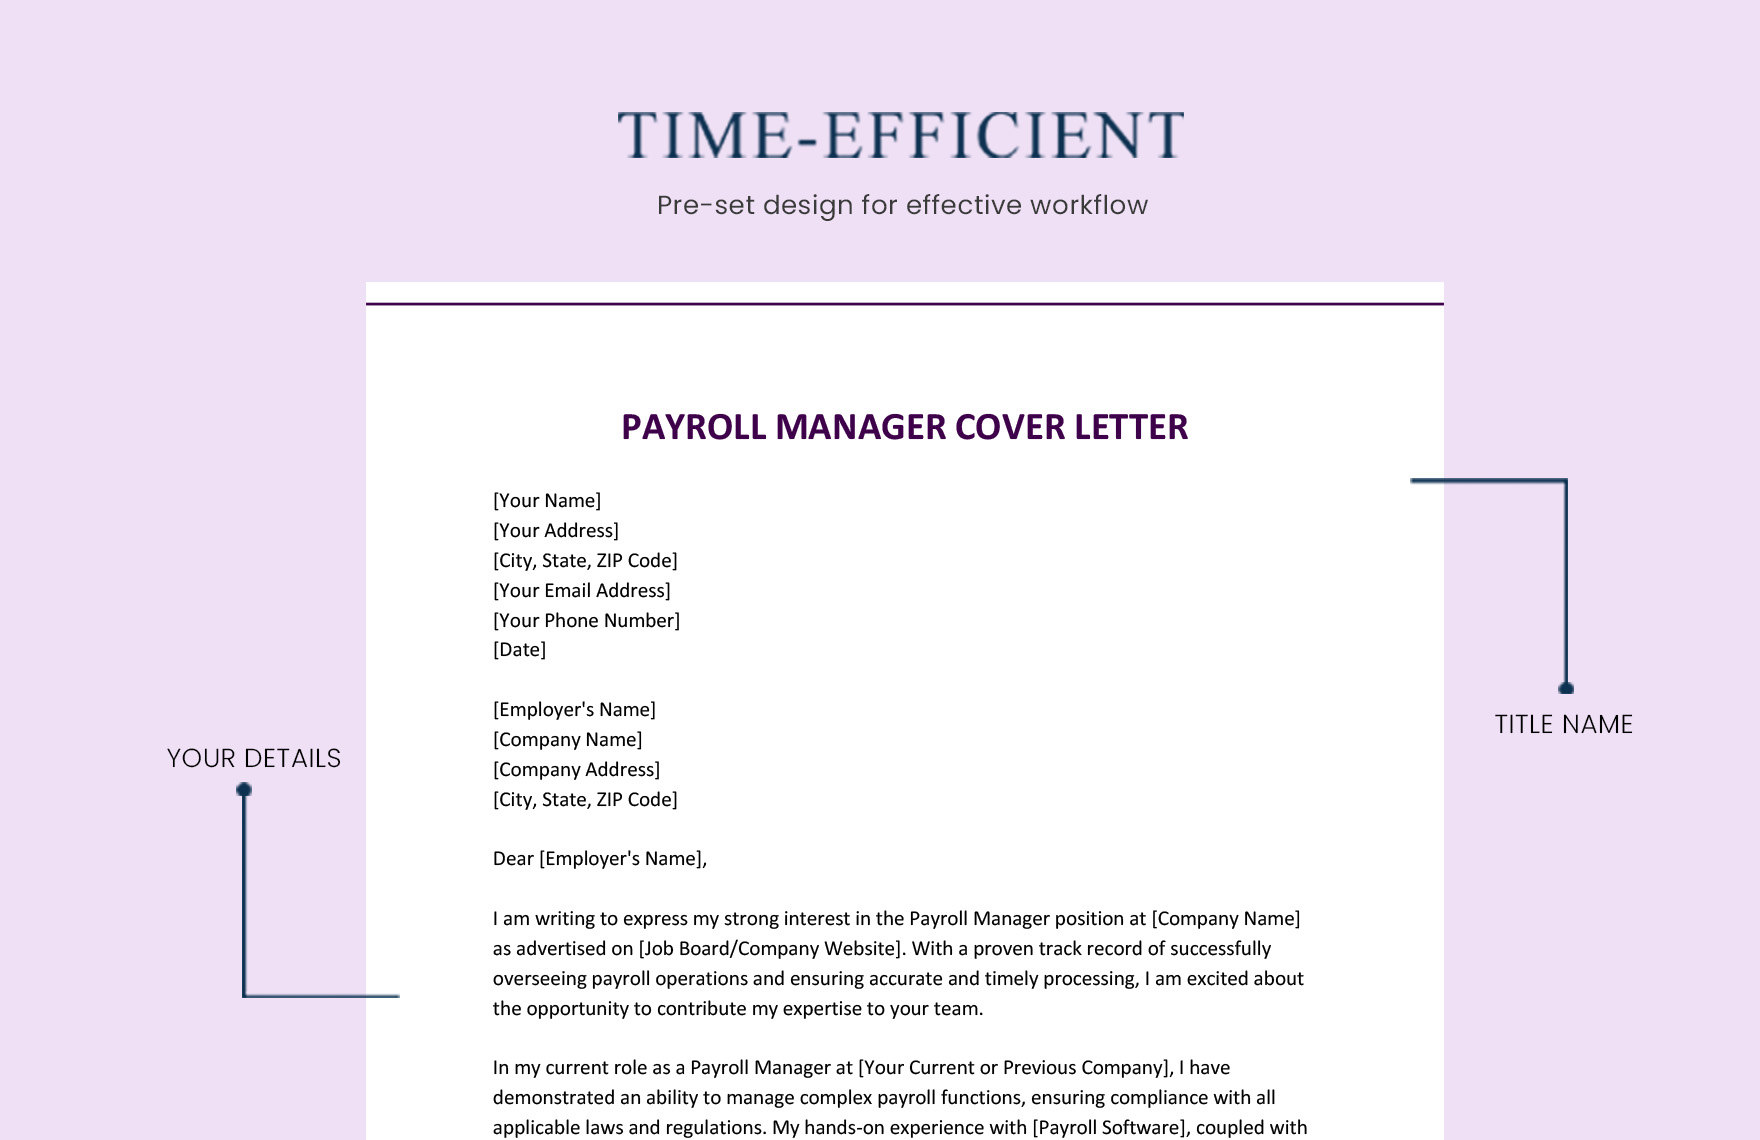 Payroll Manager Cover Letter